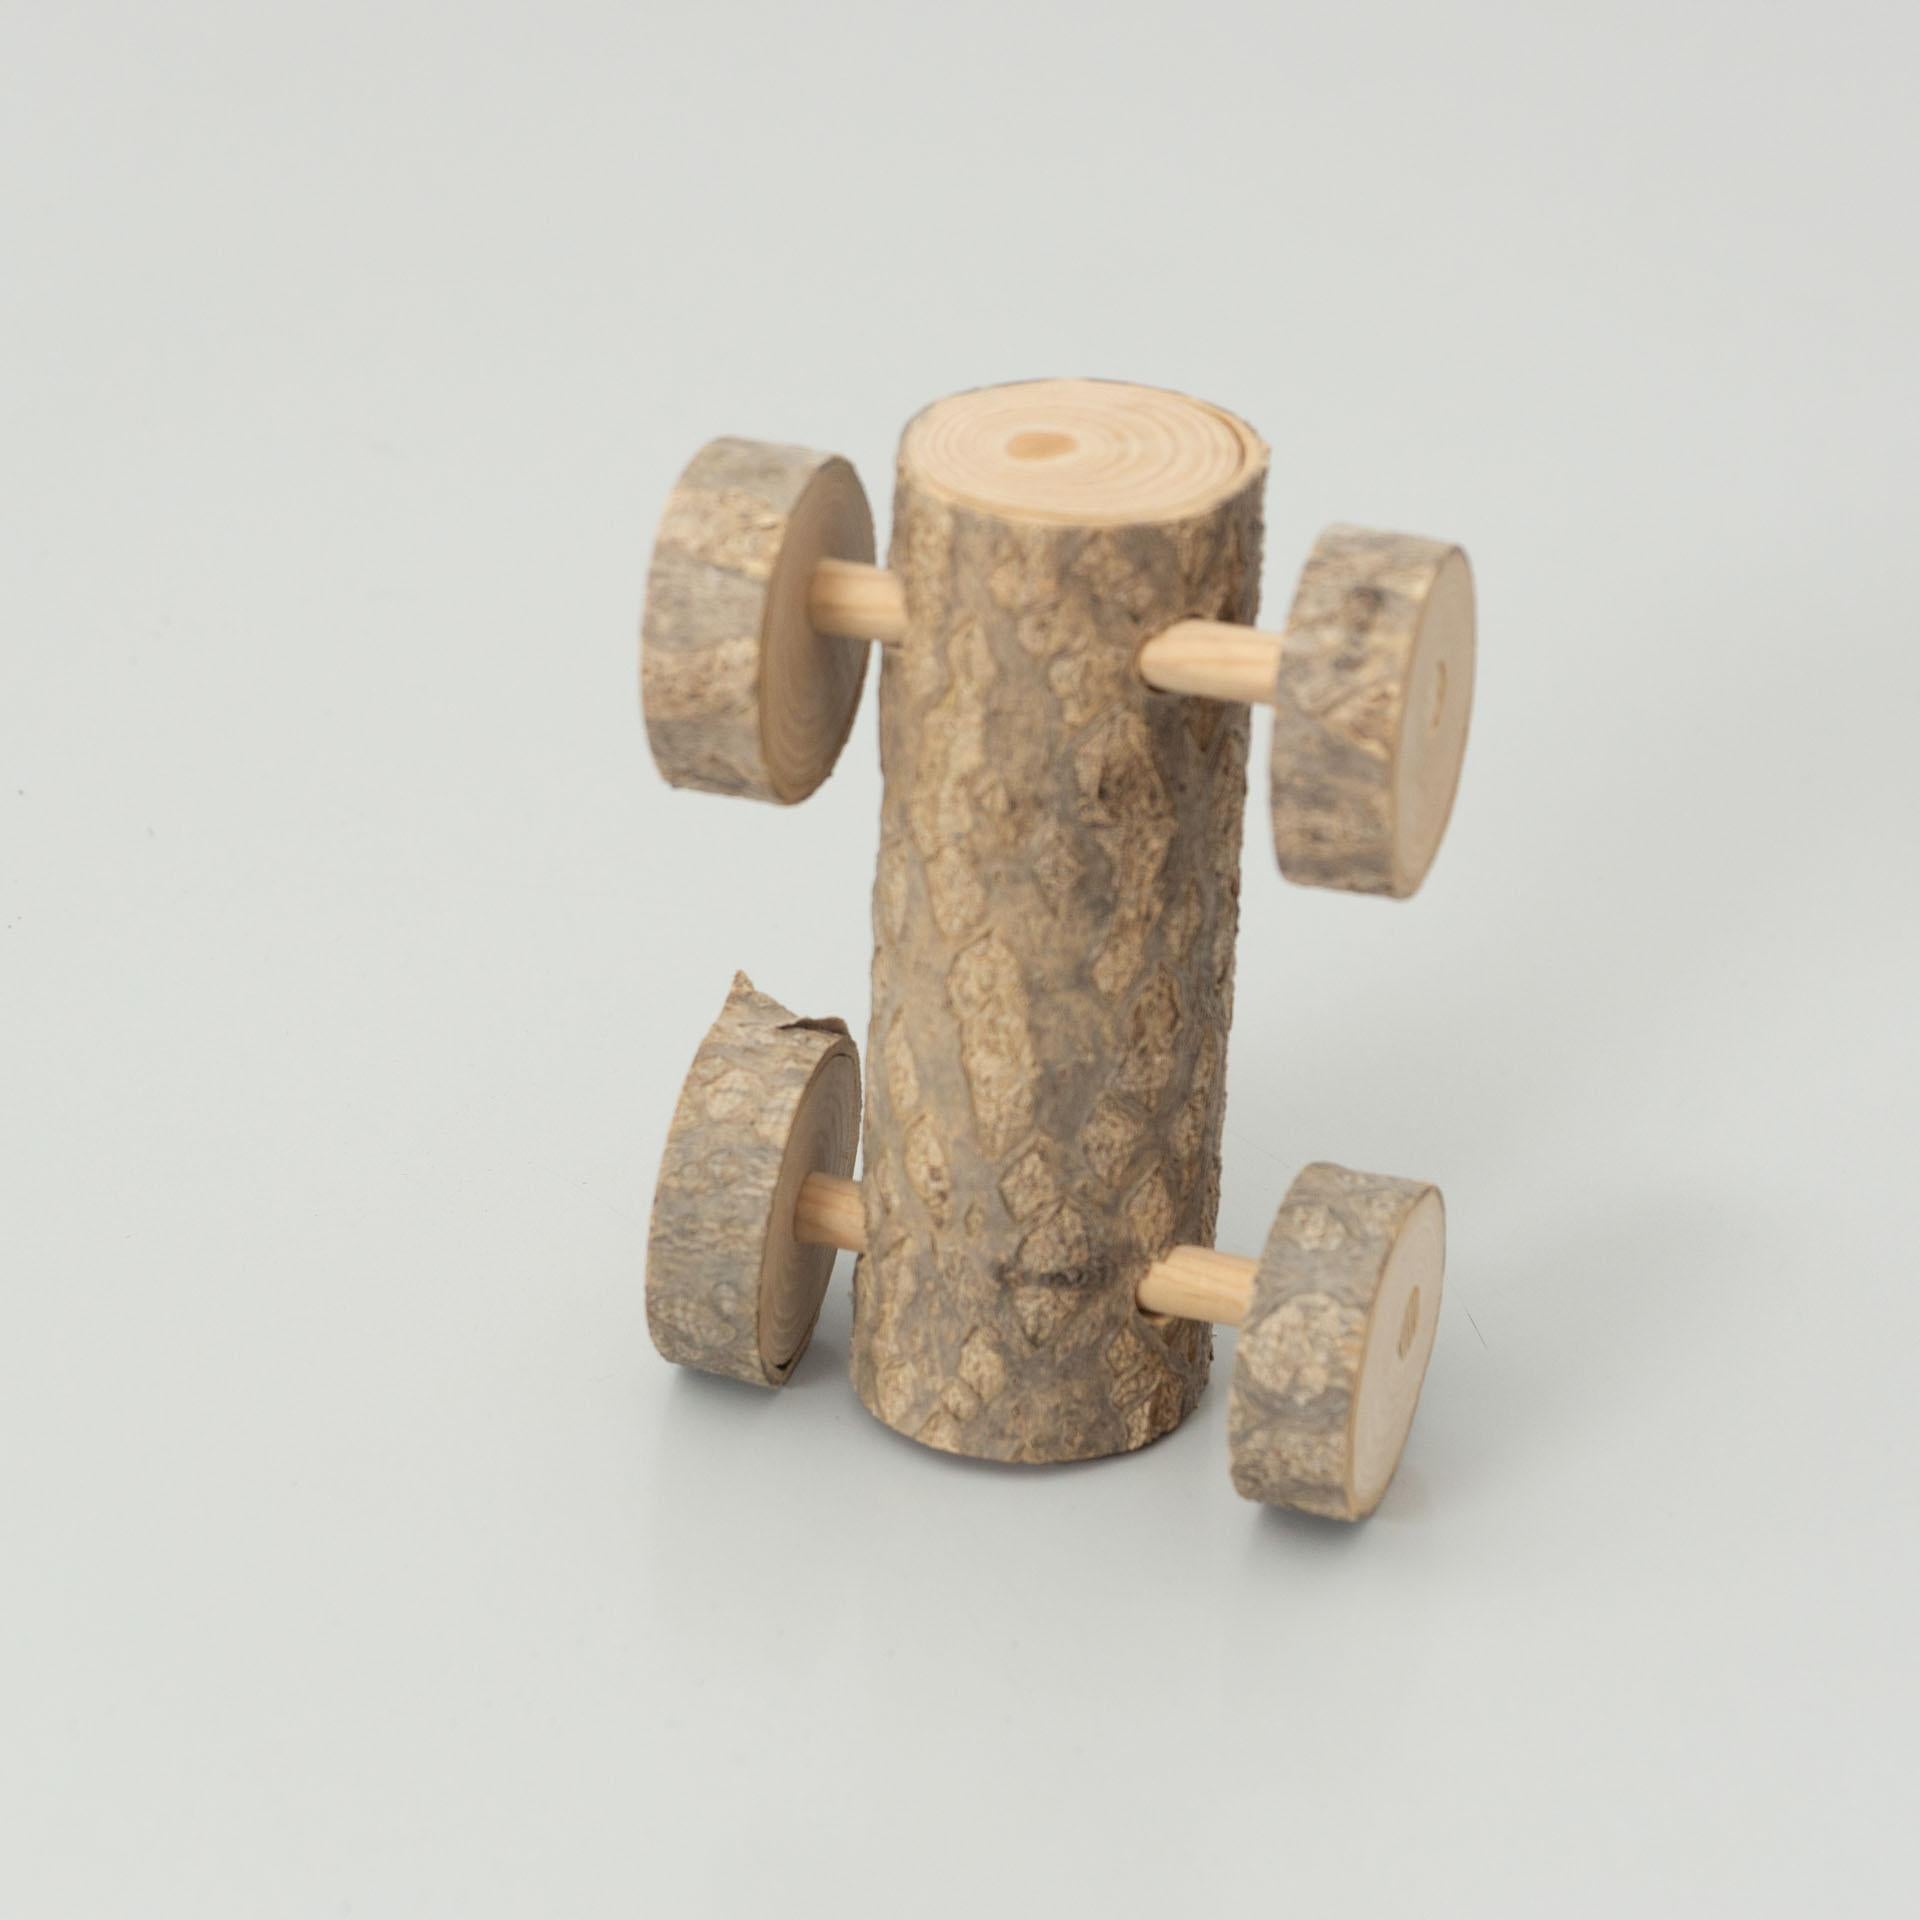 Wood Set of Two Luci Tree Carwooden Sculptural Toy, 2018